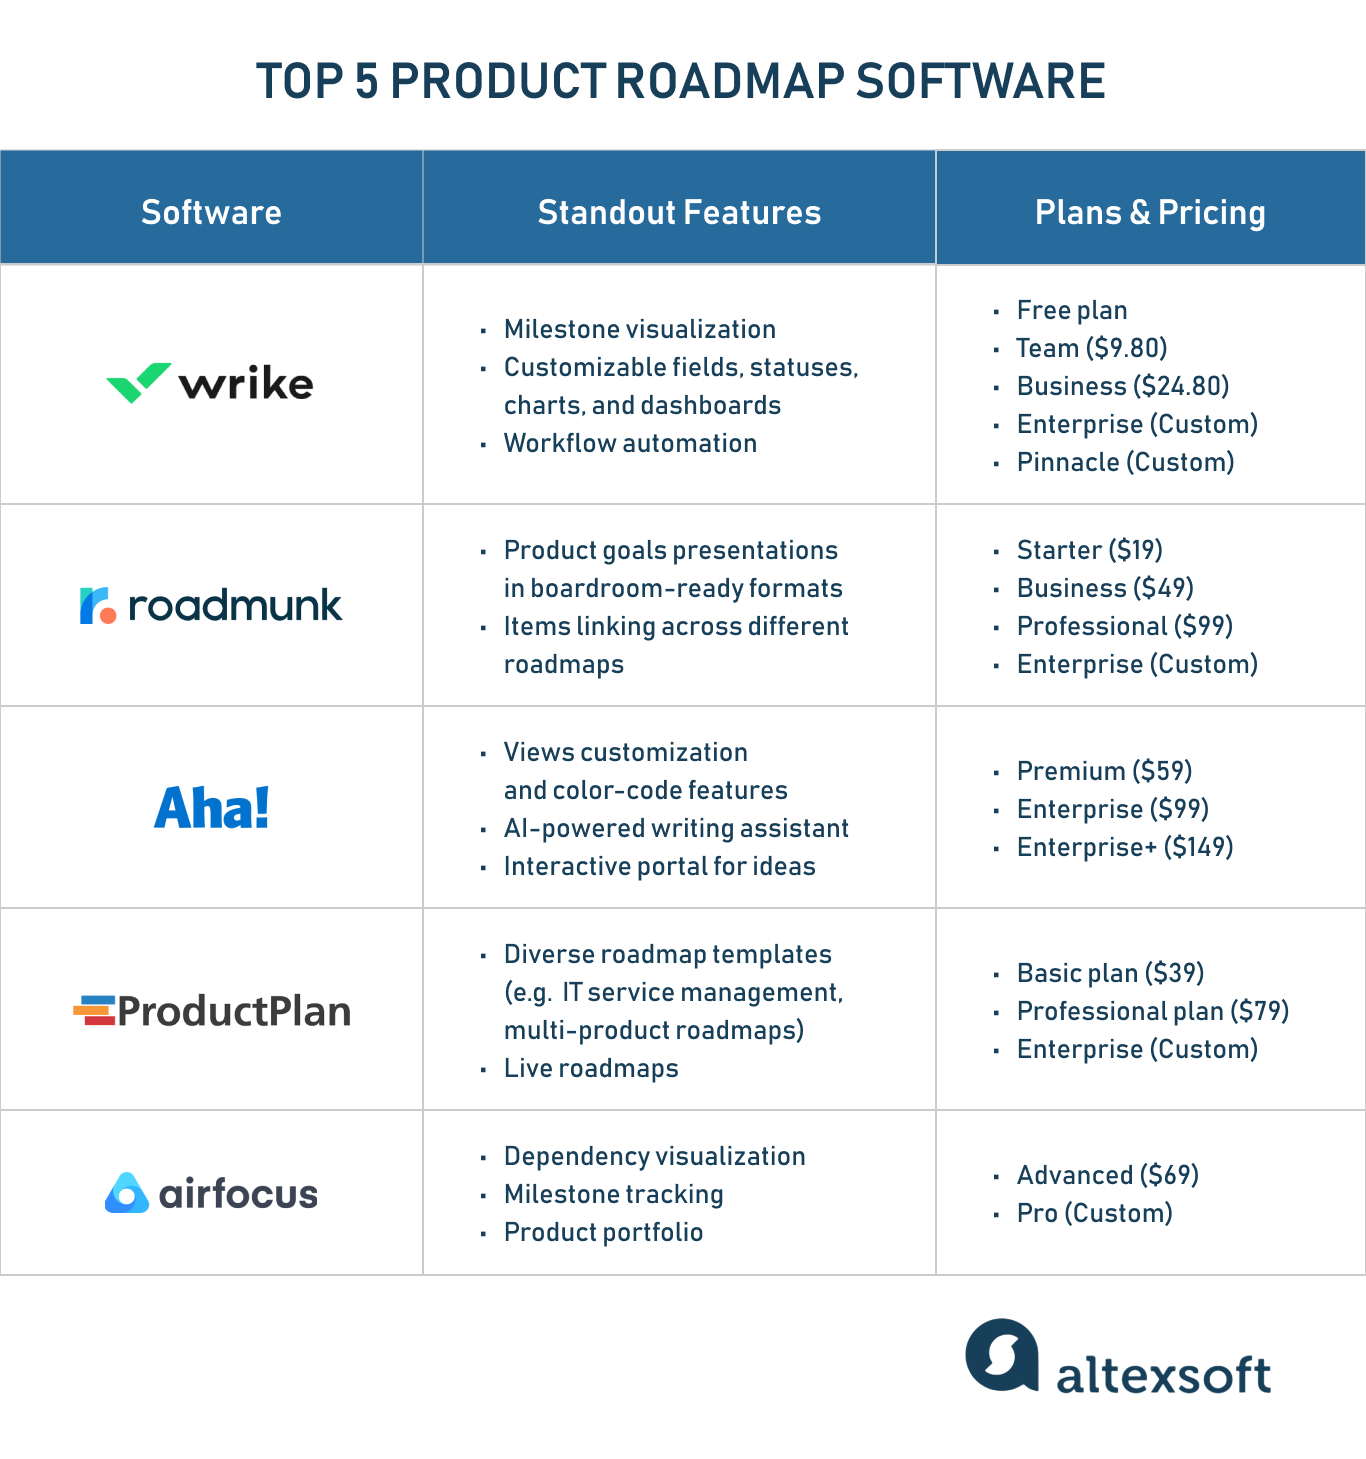 A table that shows a general overview of top 5 product roadmap software highlighting standout features and pricing plans of each tool